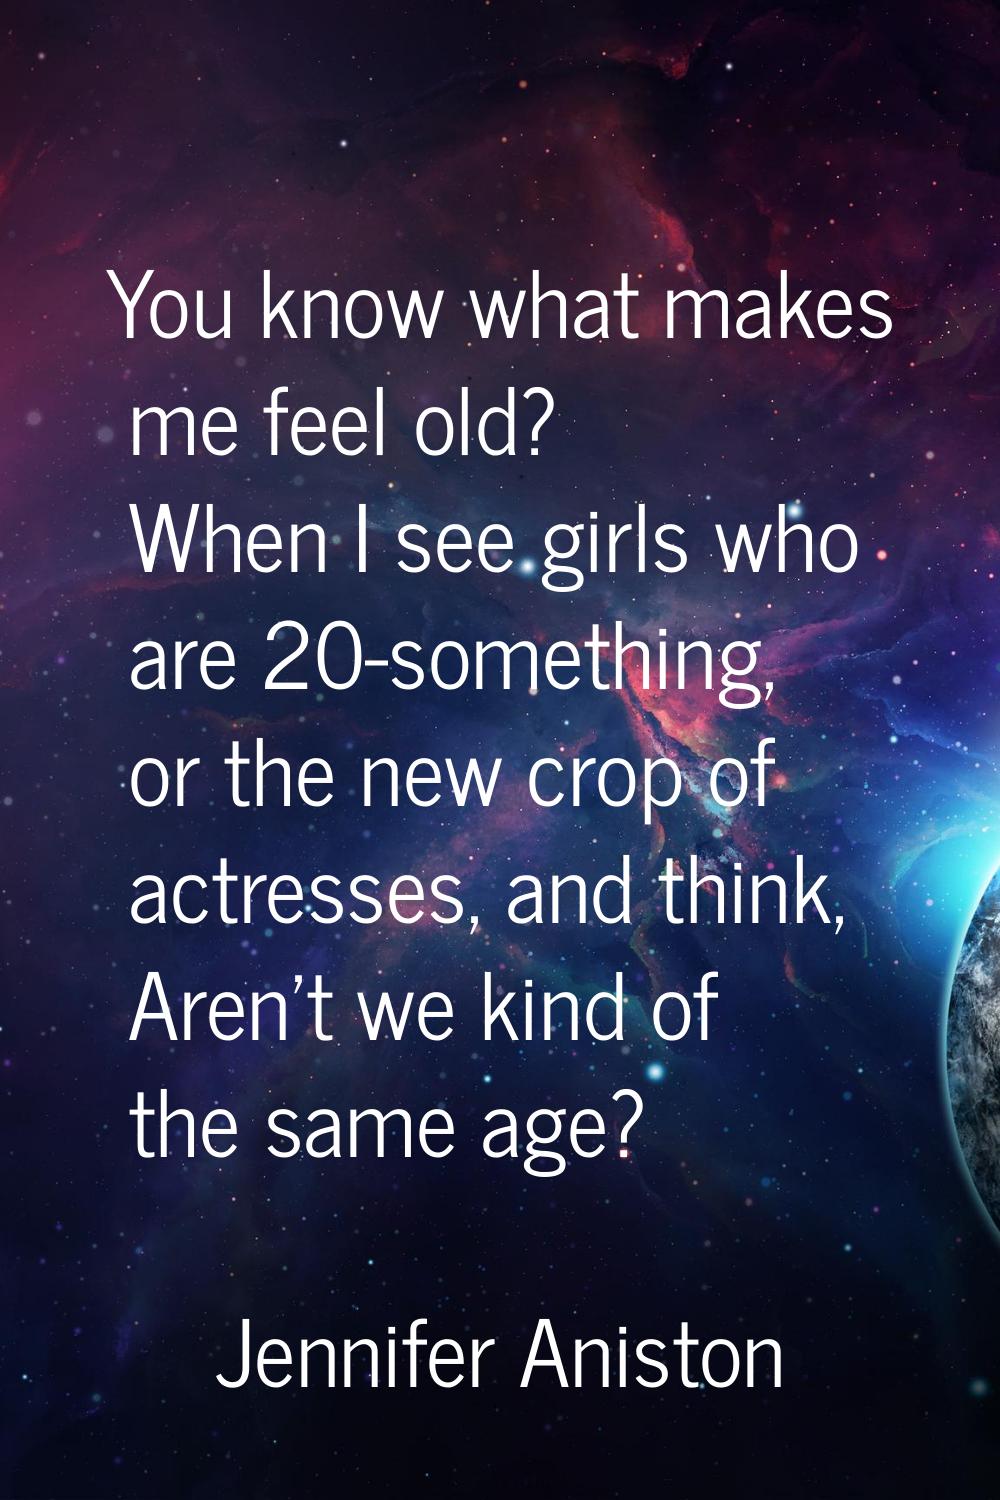 You know what makes me feel old? When I see girls who are 20-something, or the new crop of actresse